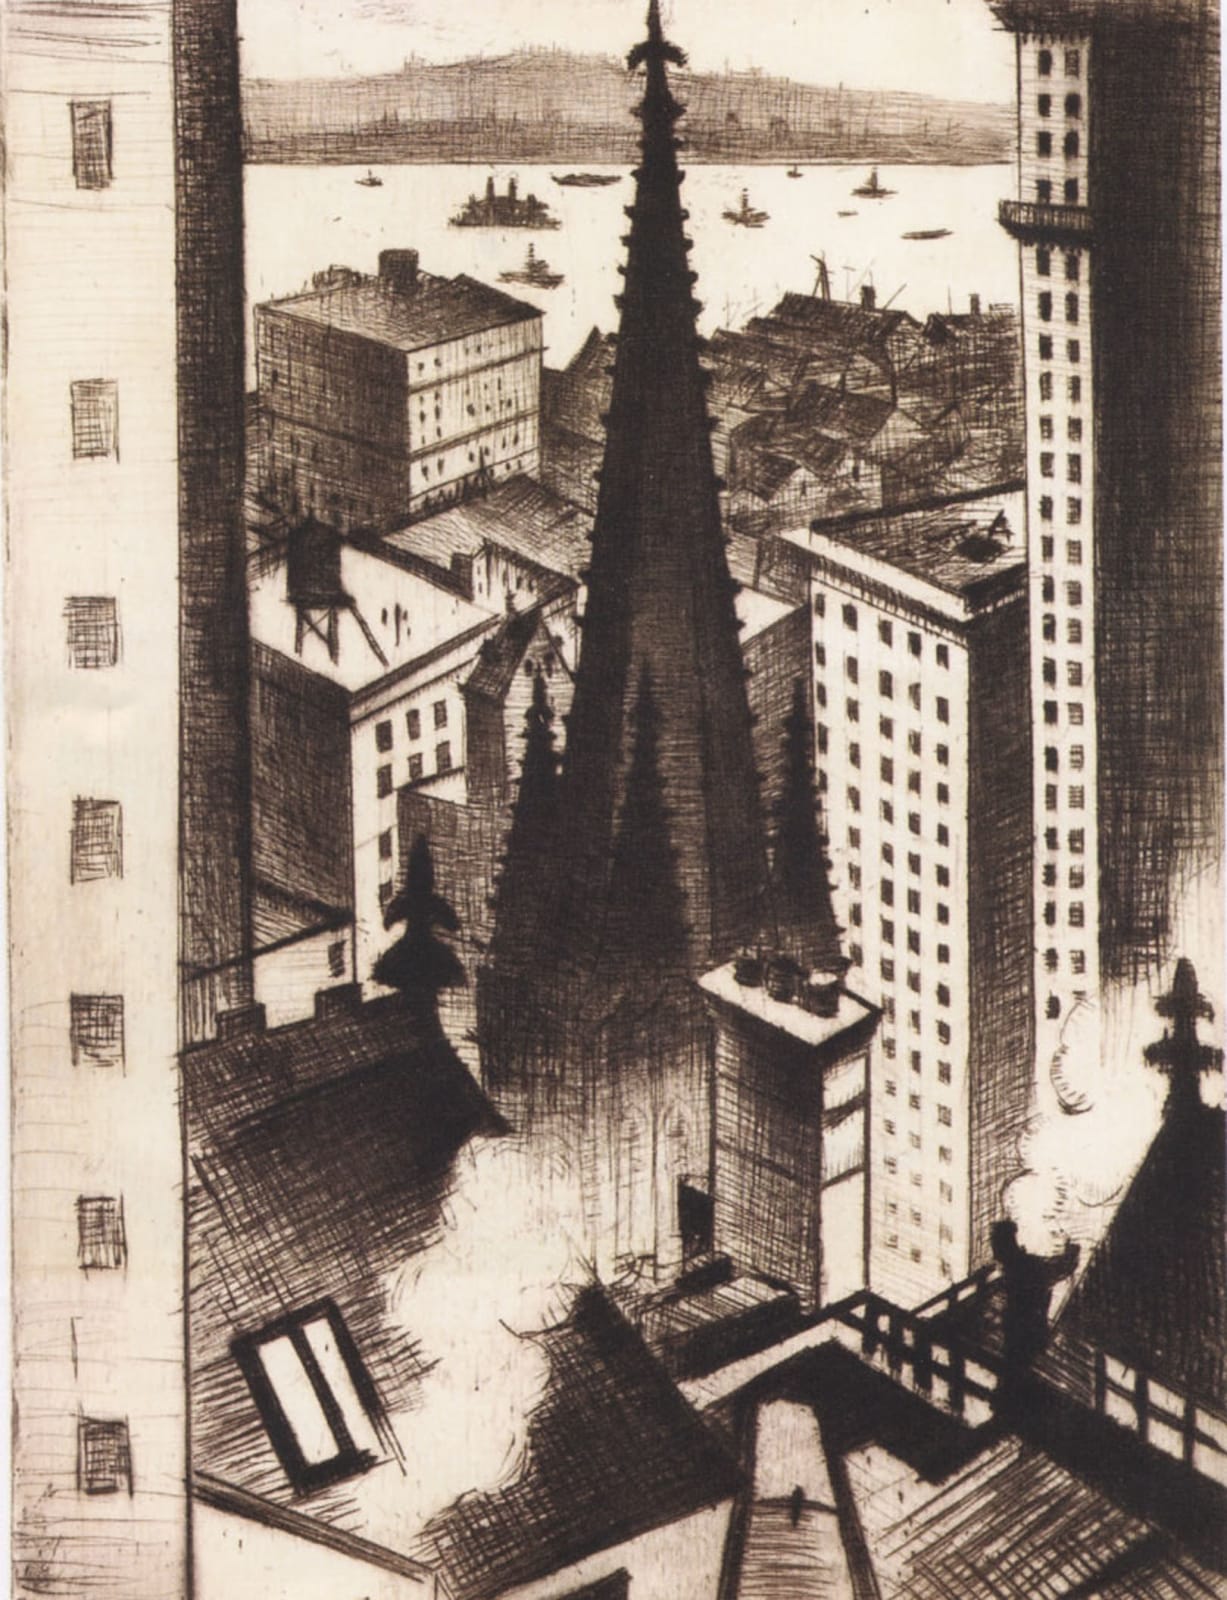 CHRISTOPHER RICHARD WYNNE NEVINSON, The Temples of New York, 1921